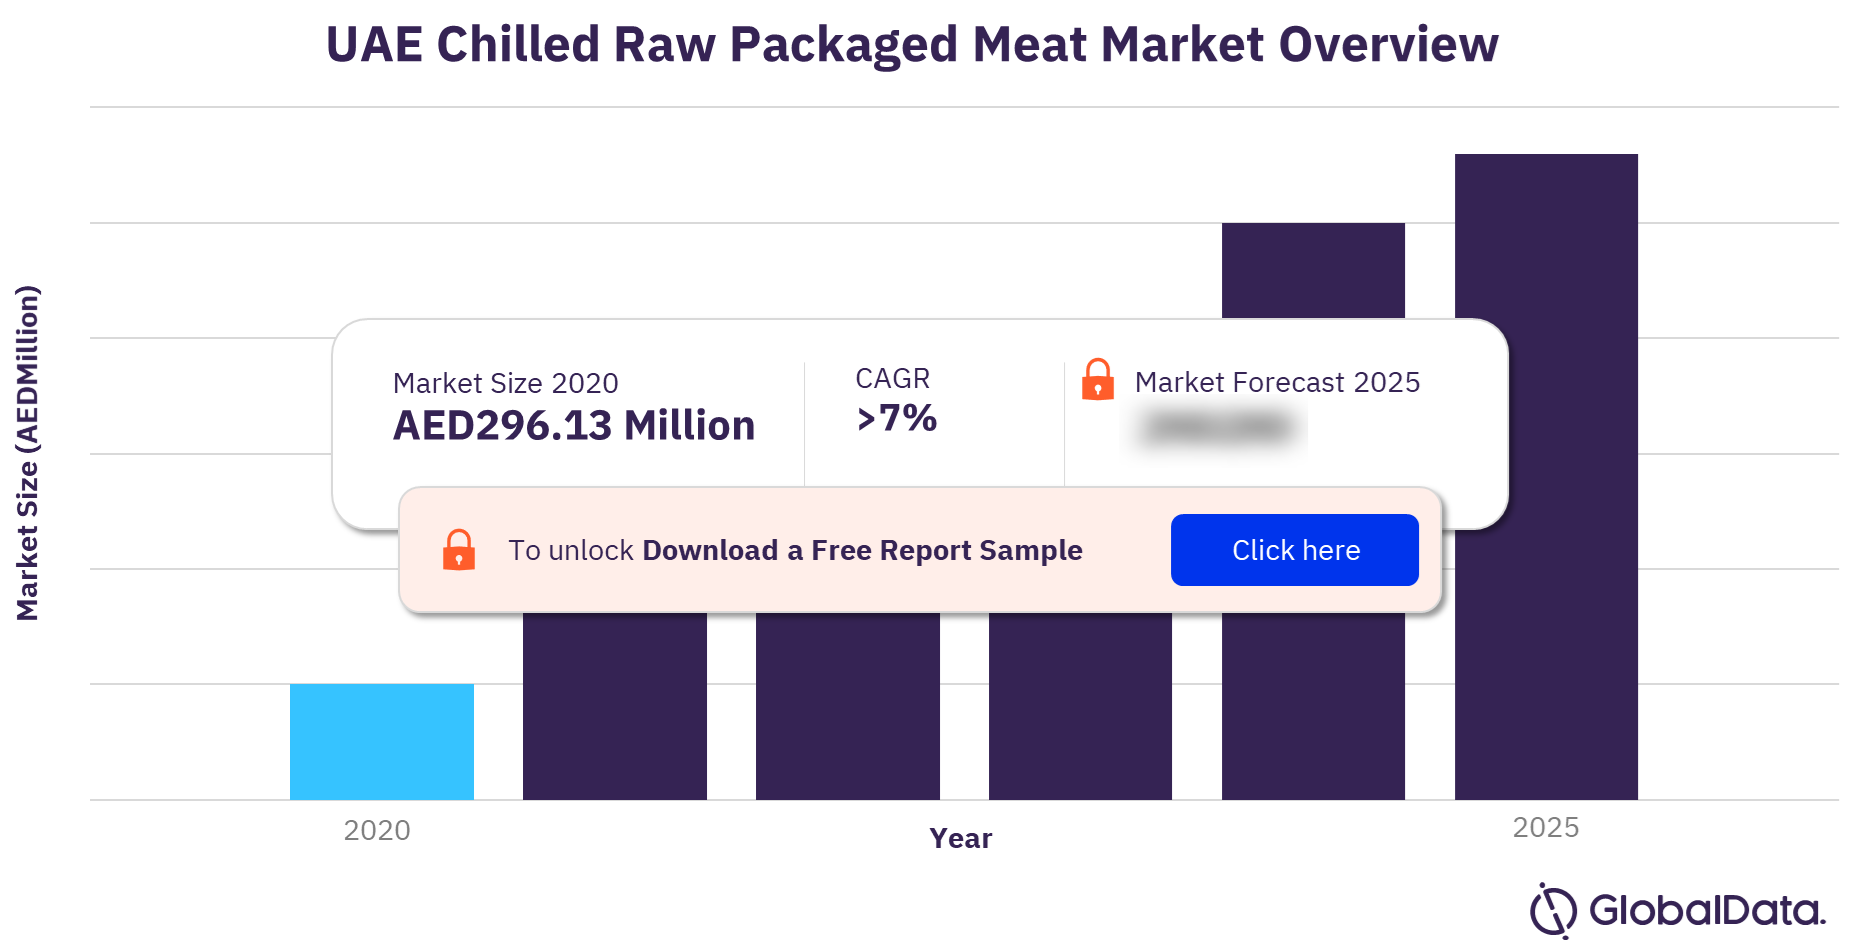 UAE chilled raw packaged meat market outlook